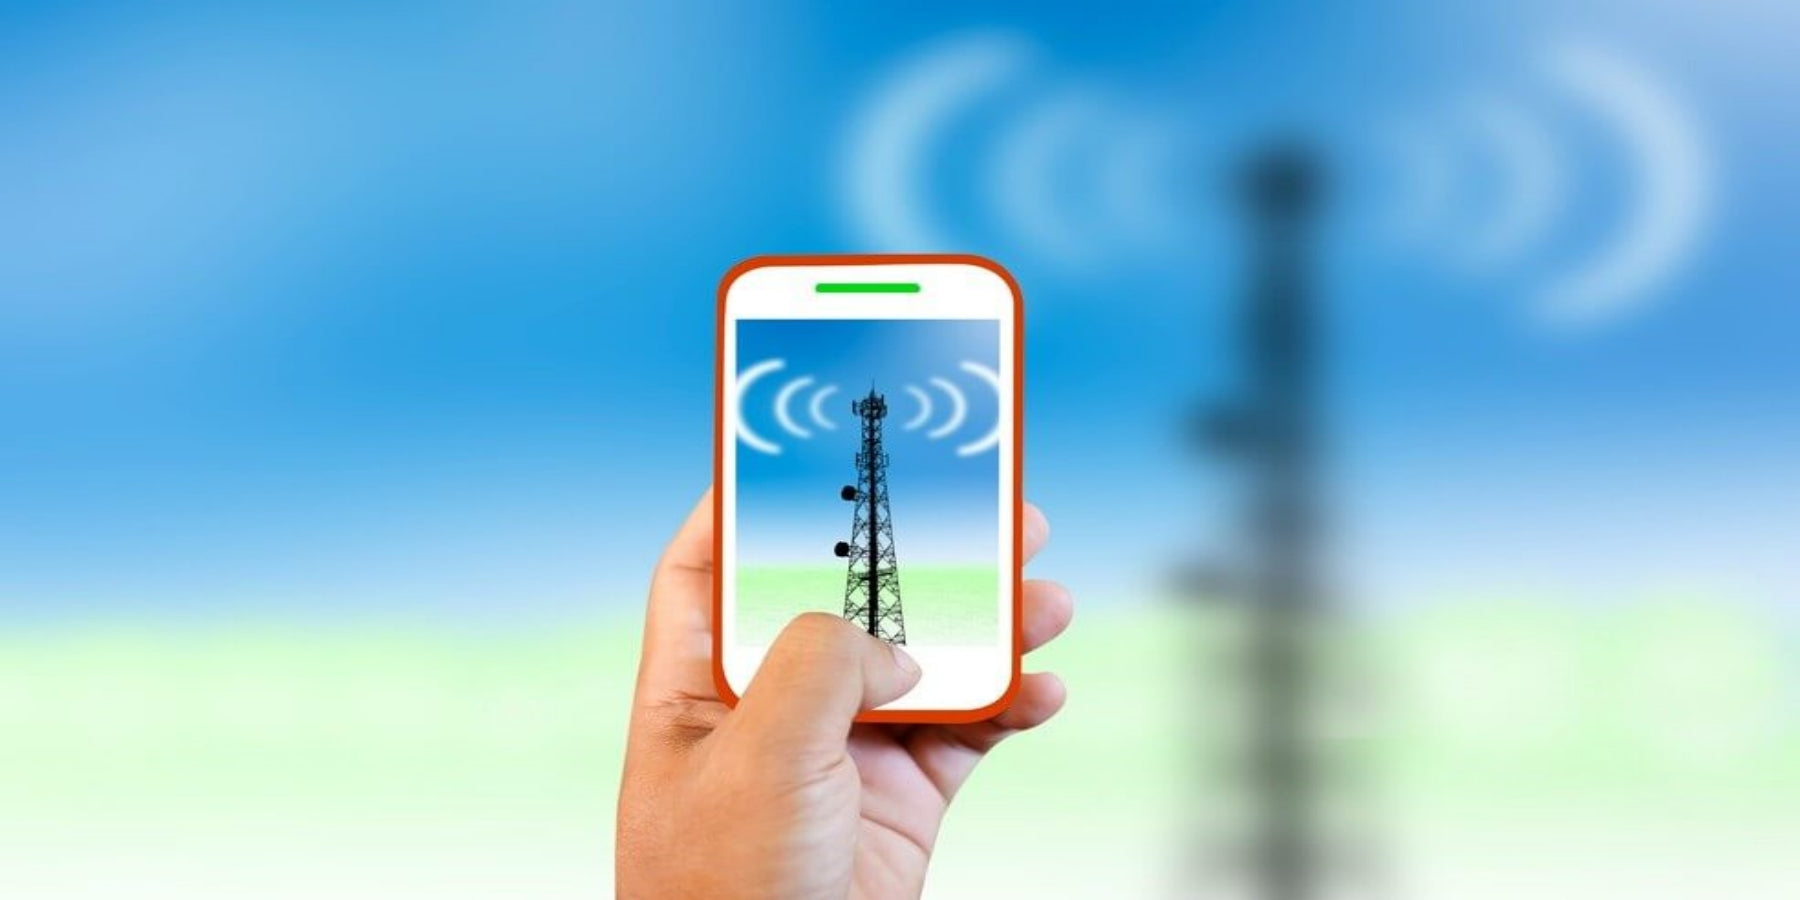 How to increase mobile network signal in the home